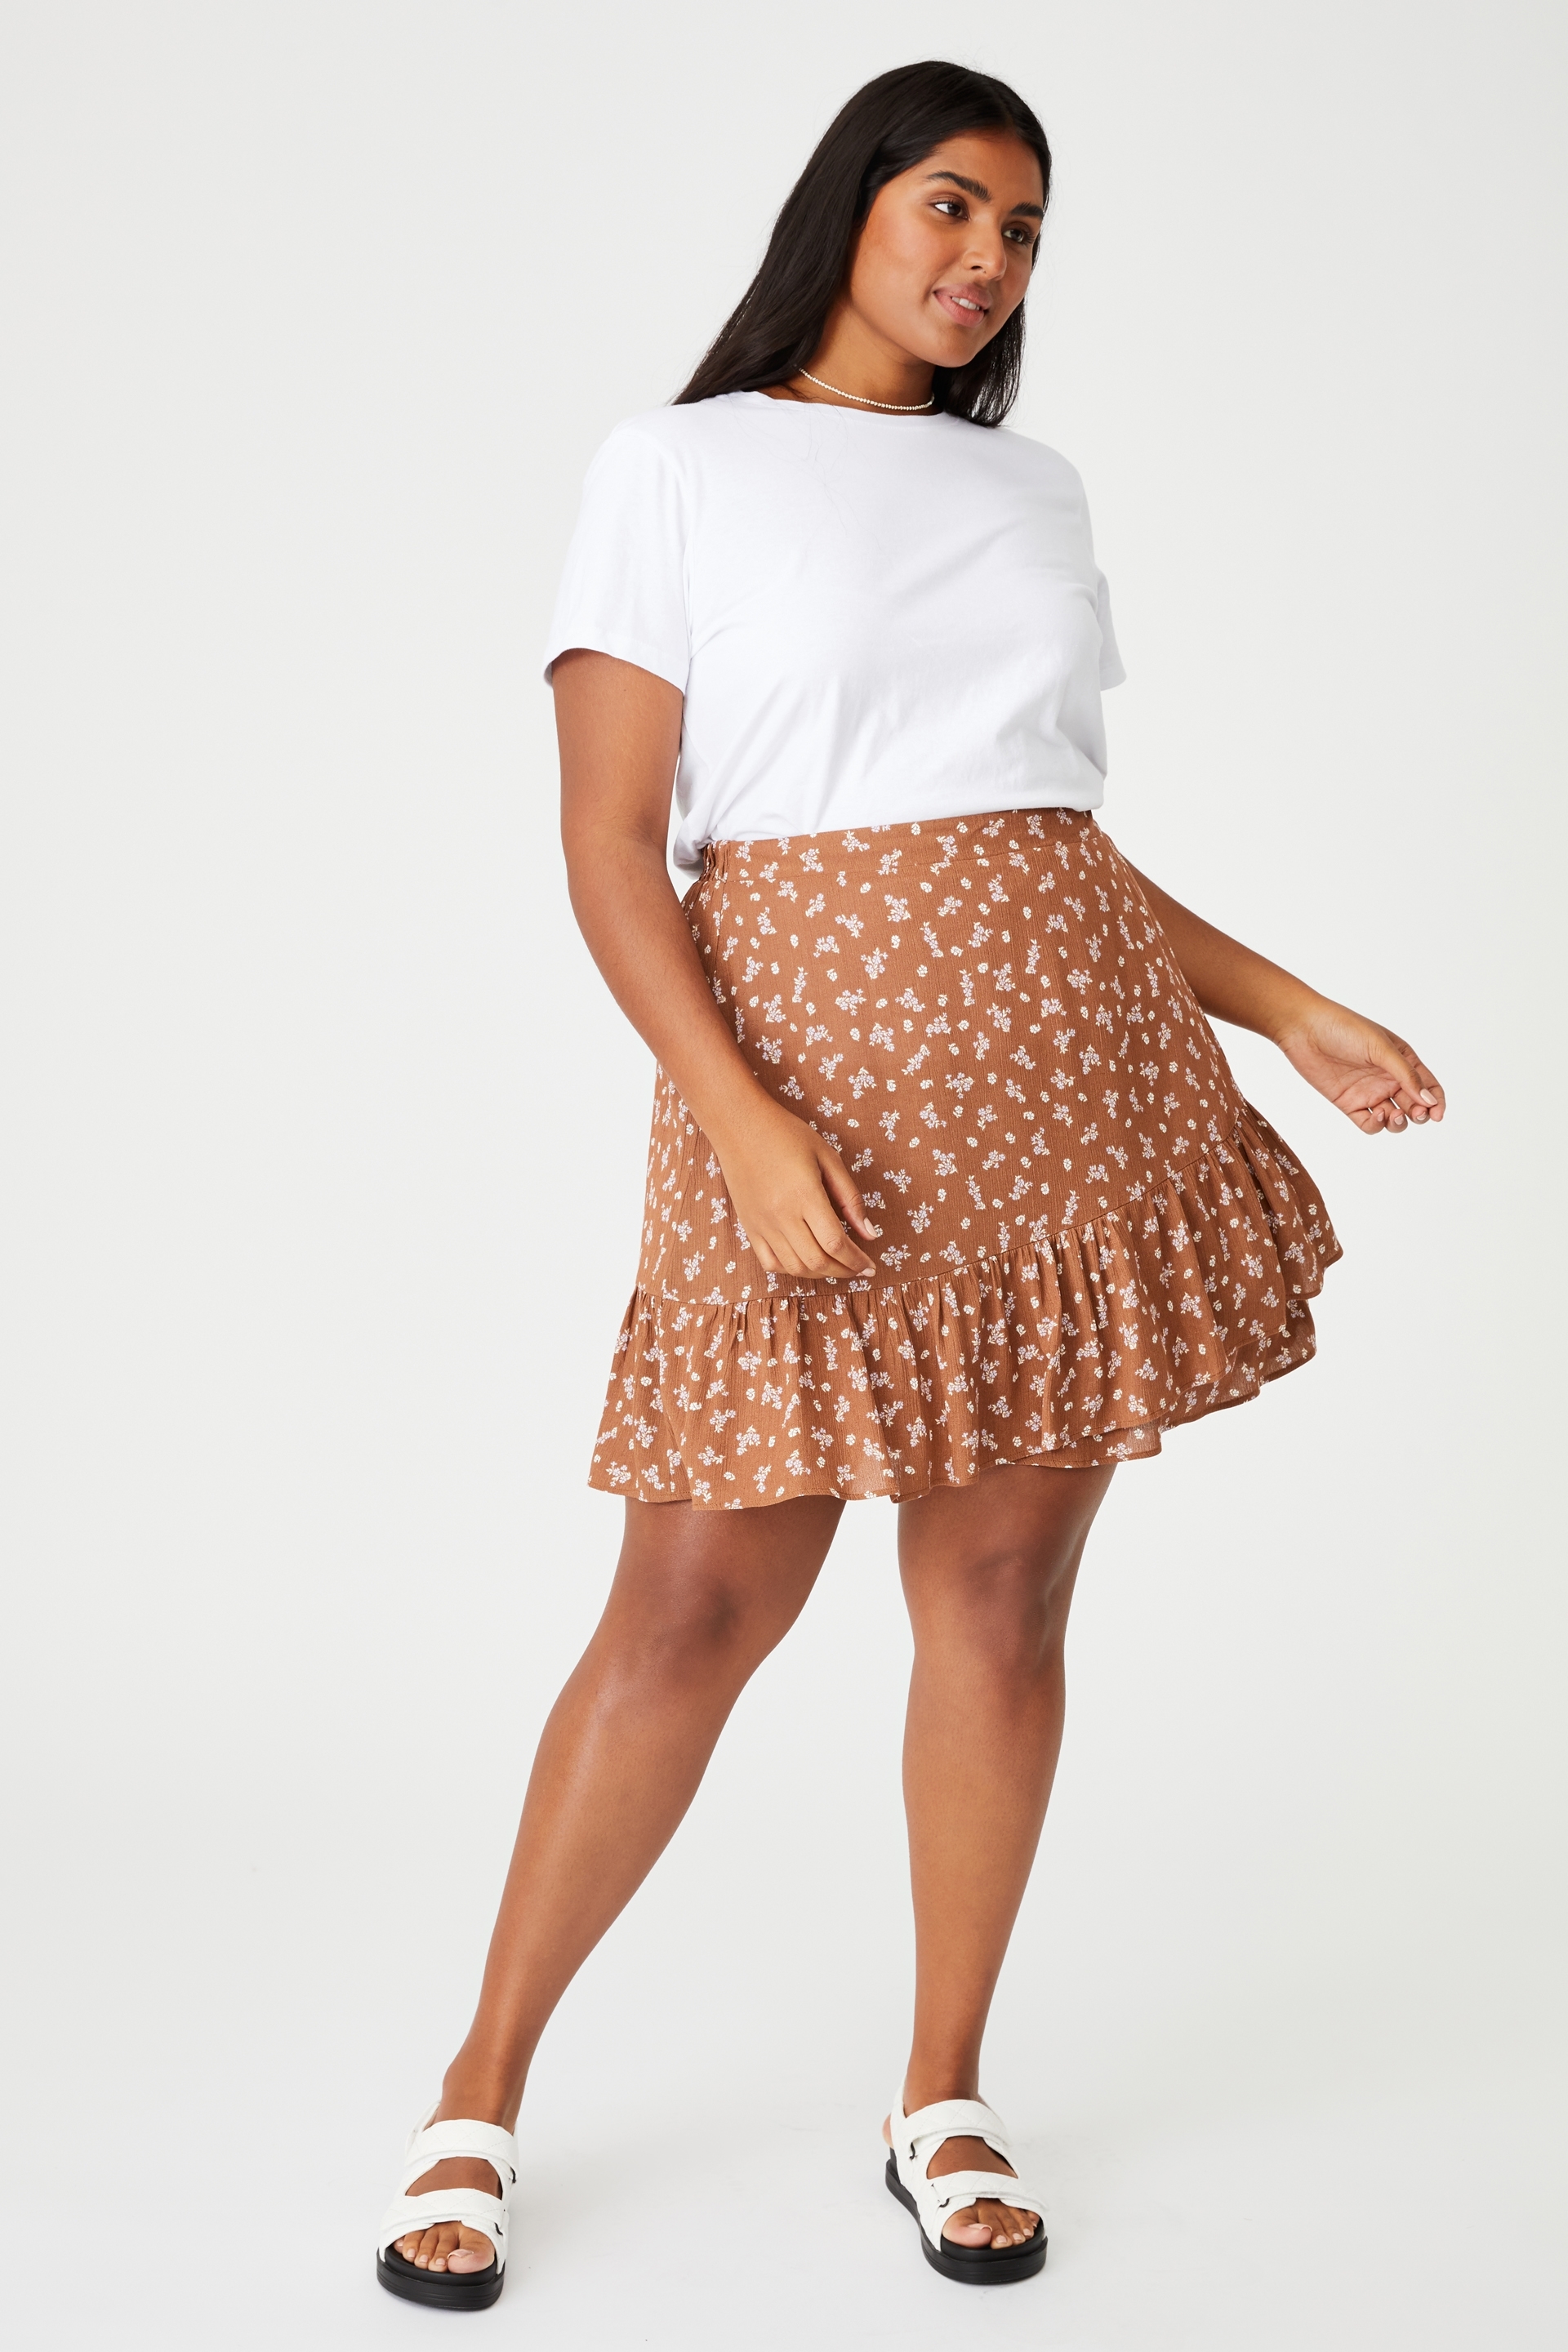 Cotton On Women - Curve Asymmetric Frill Mini Skirt - Riddle ditsy leaf brown